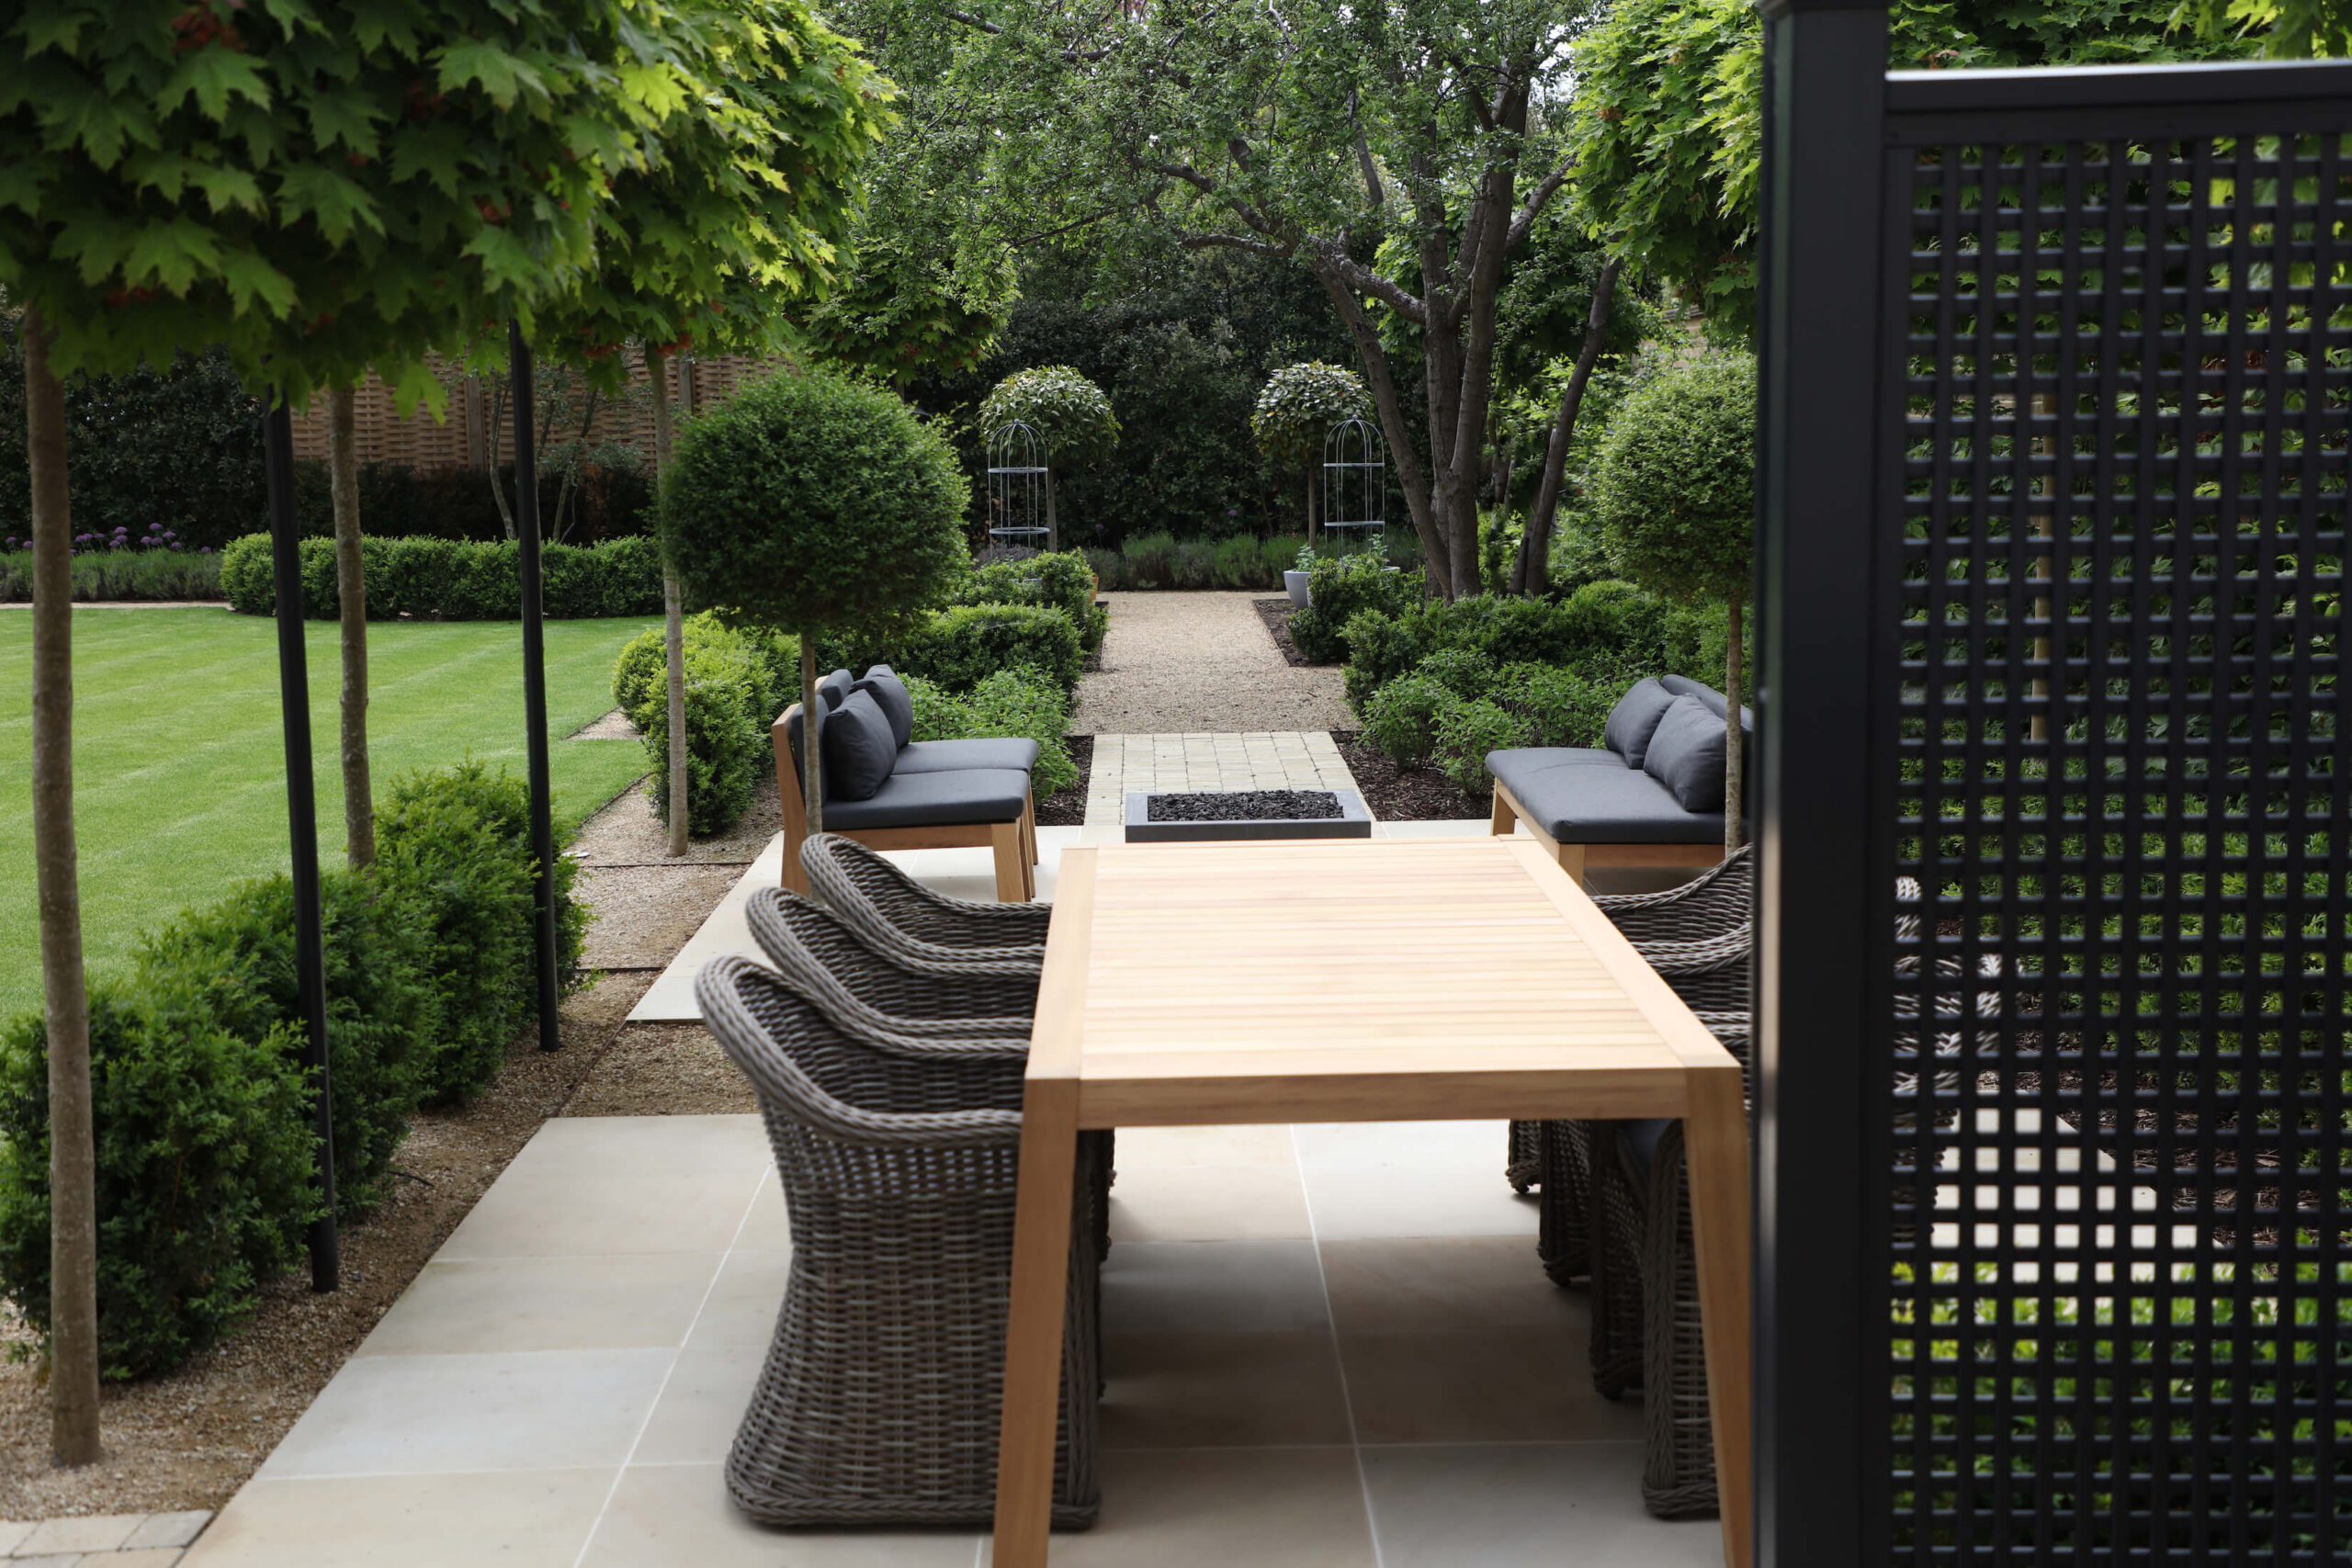 townhouse garden in Oxford dining table and chairs with topiary trees